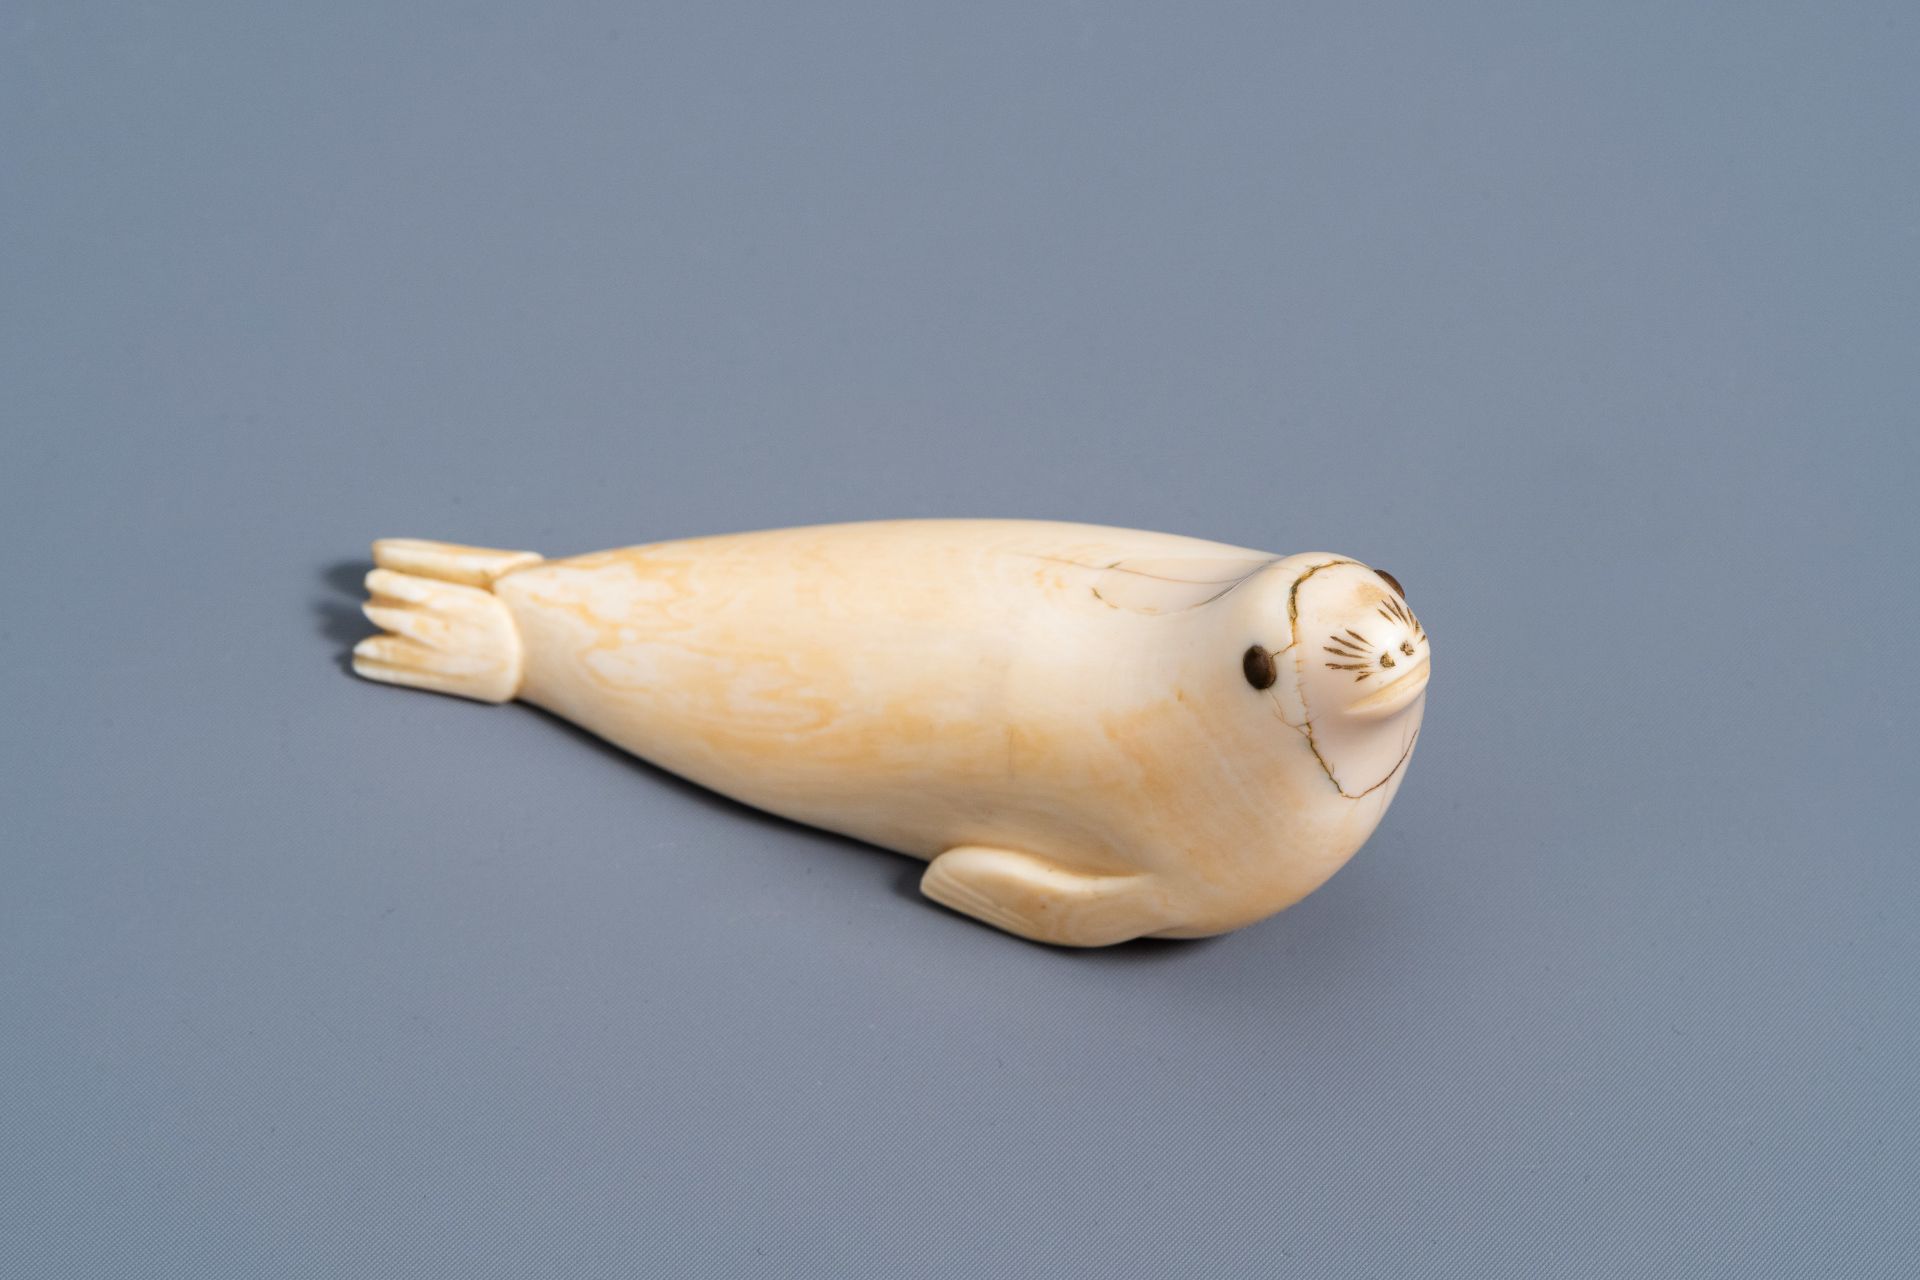 An Inuit carved whale ivory figure of a seal, Canada or Alaska, 19th C. - Image 10 of 11